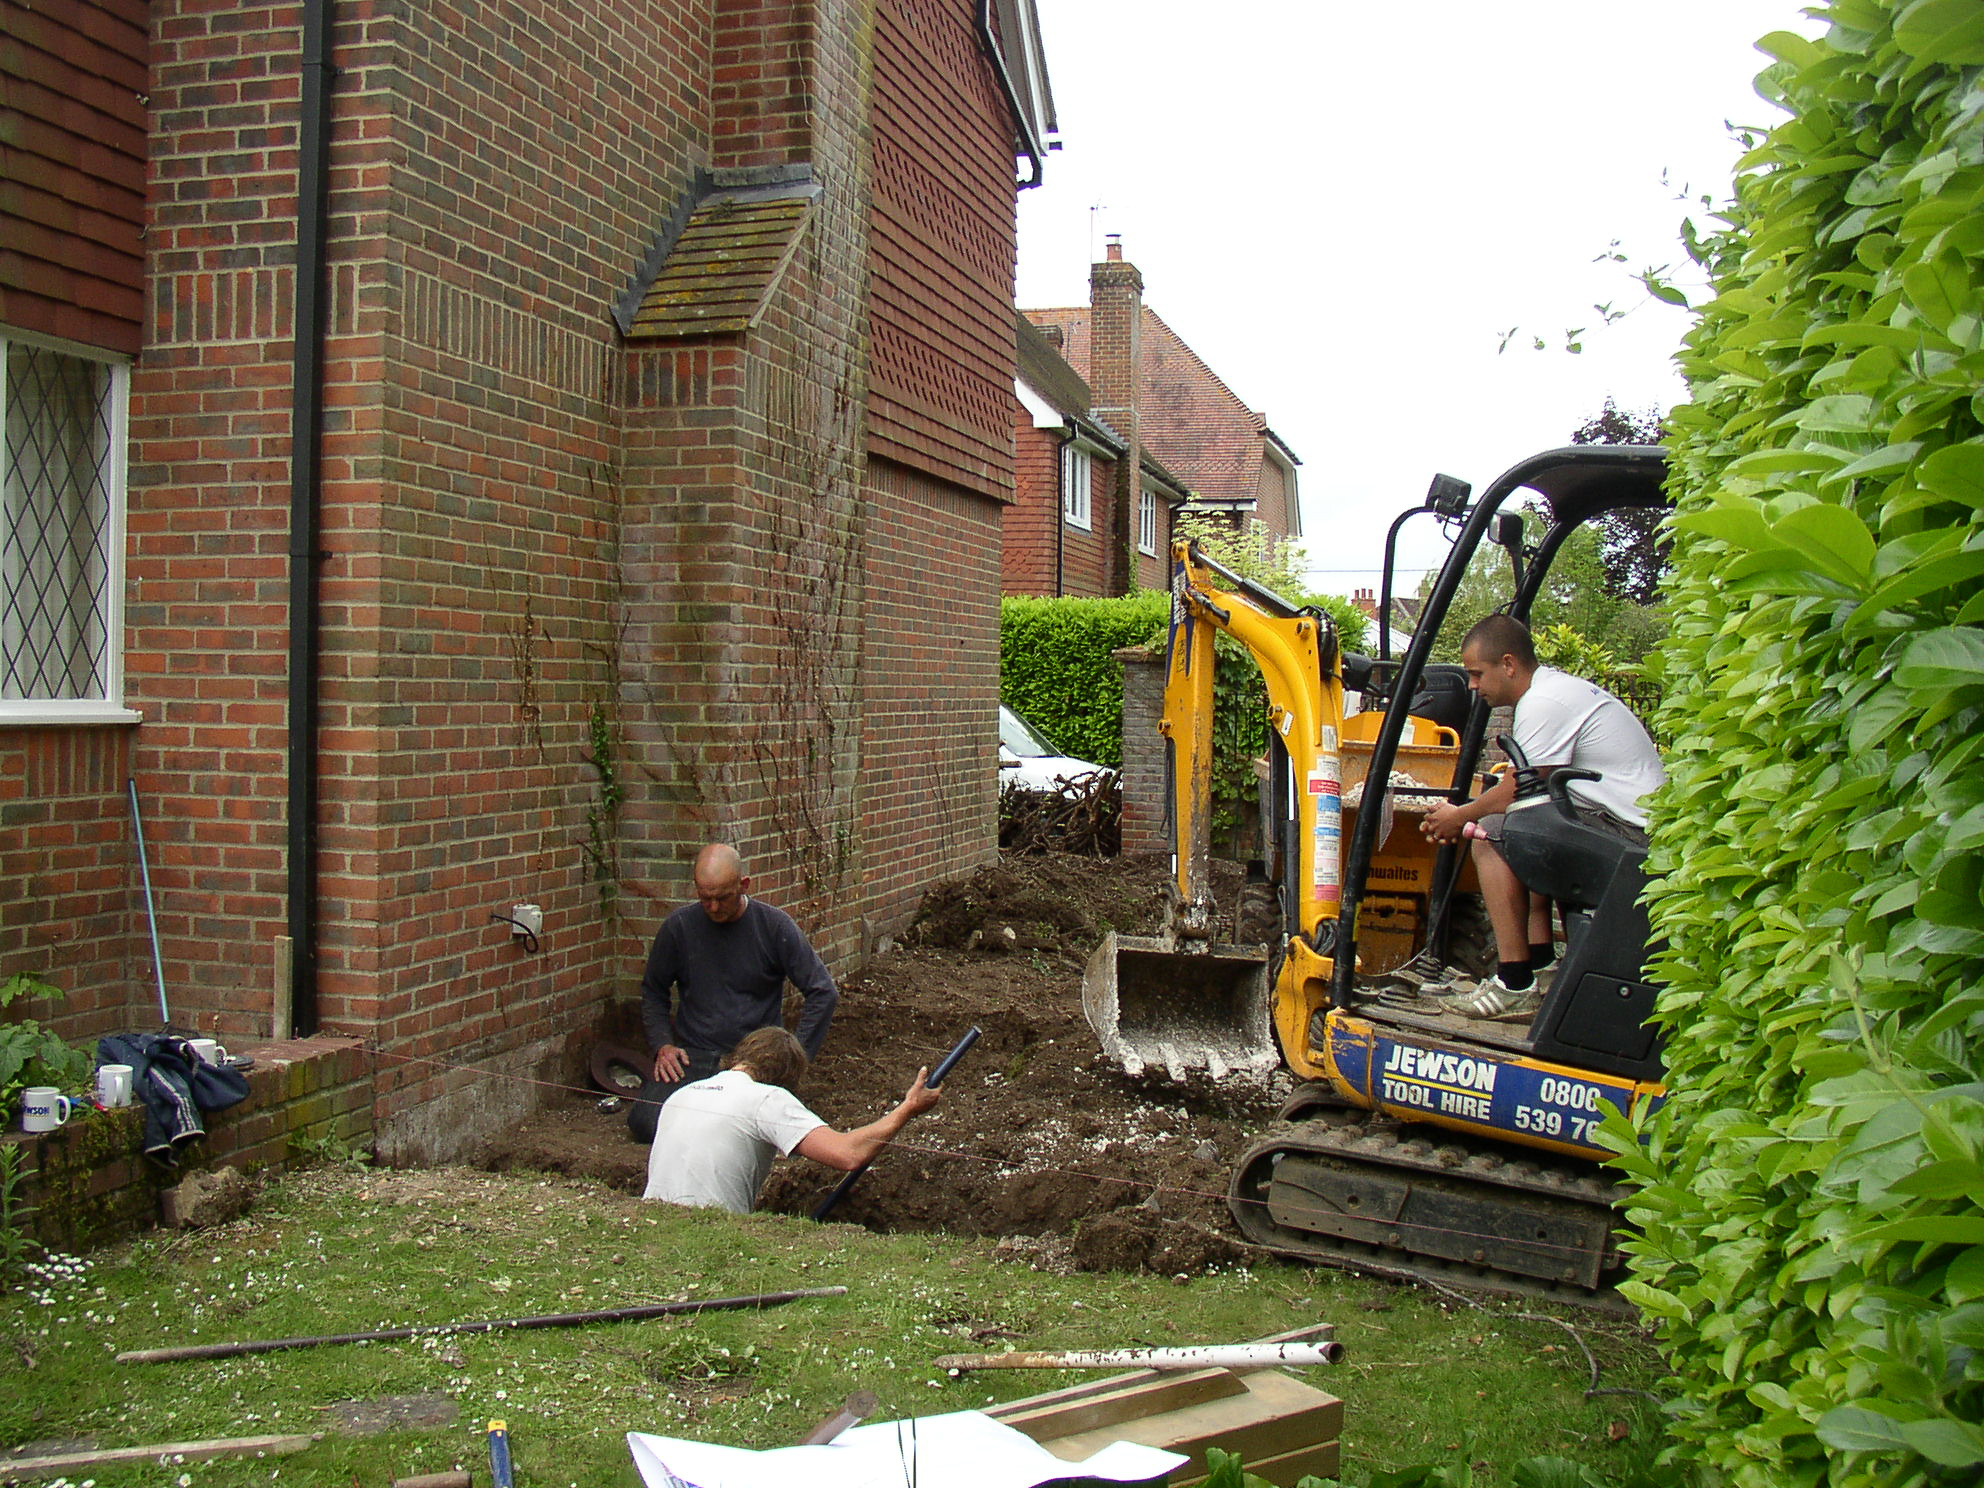 Digging foundations in the garden